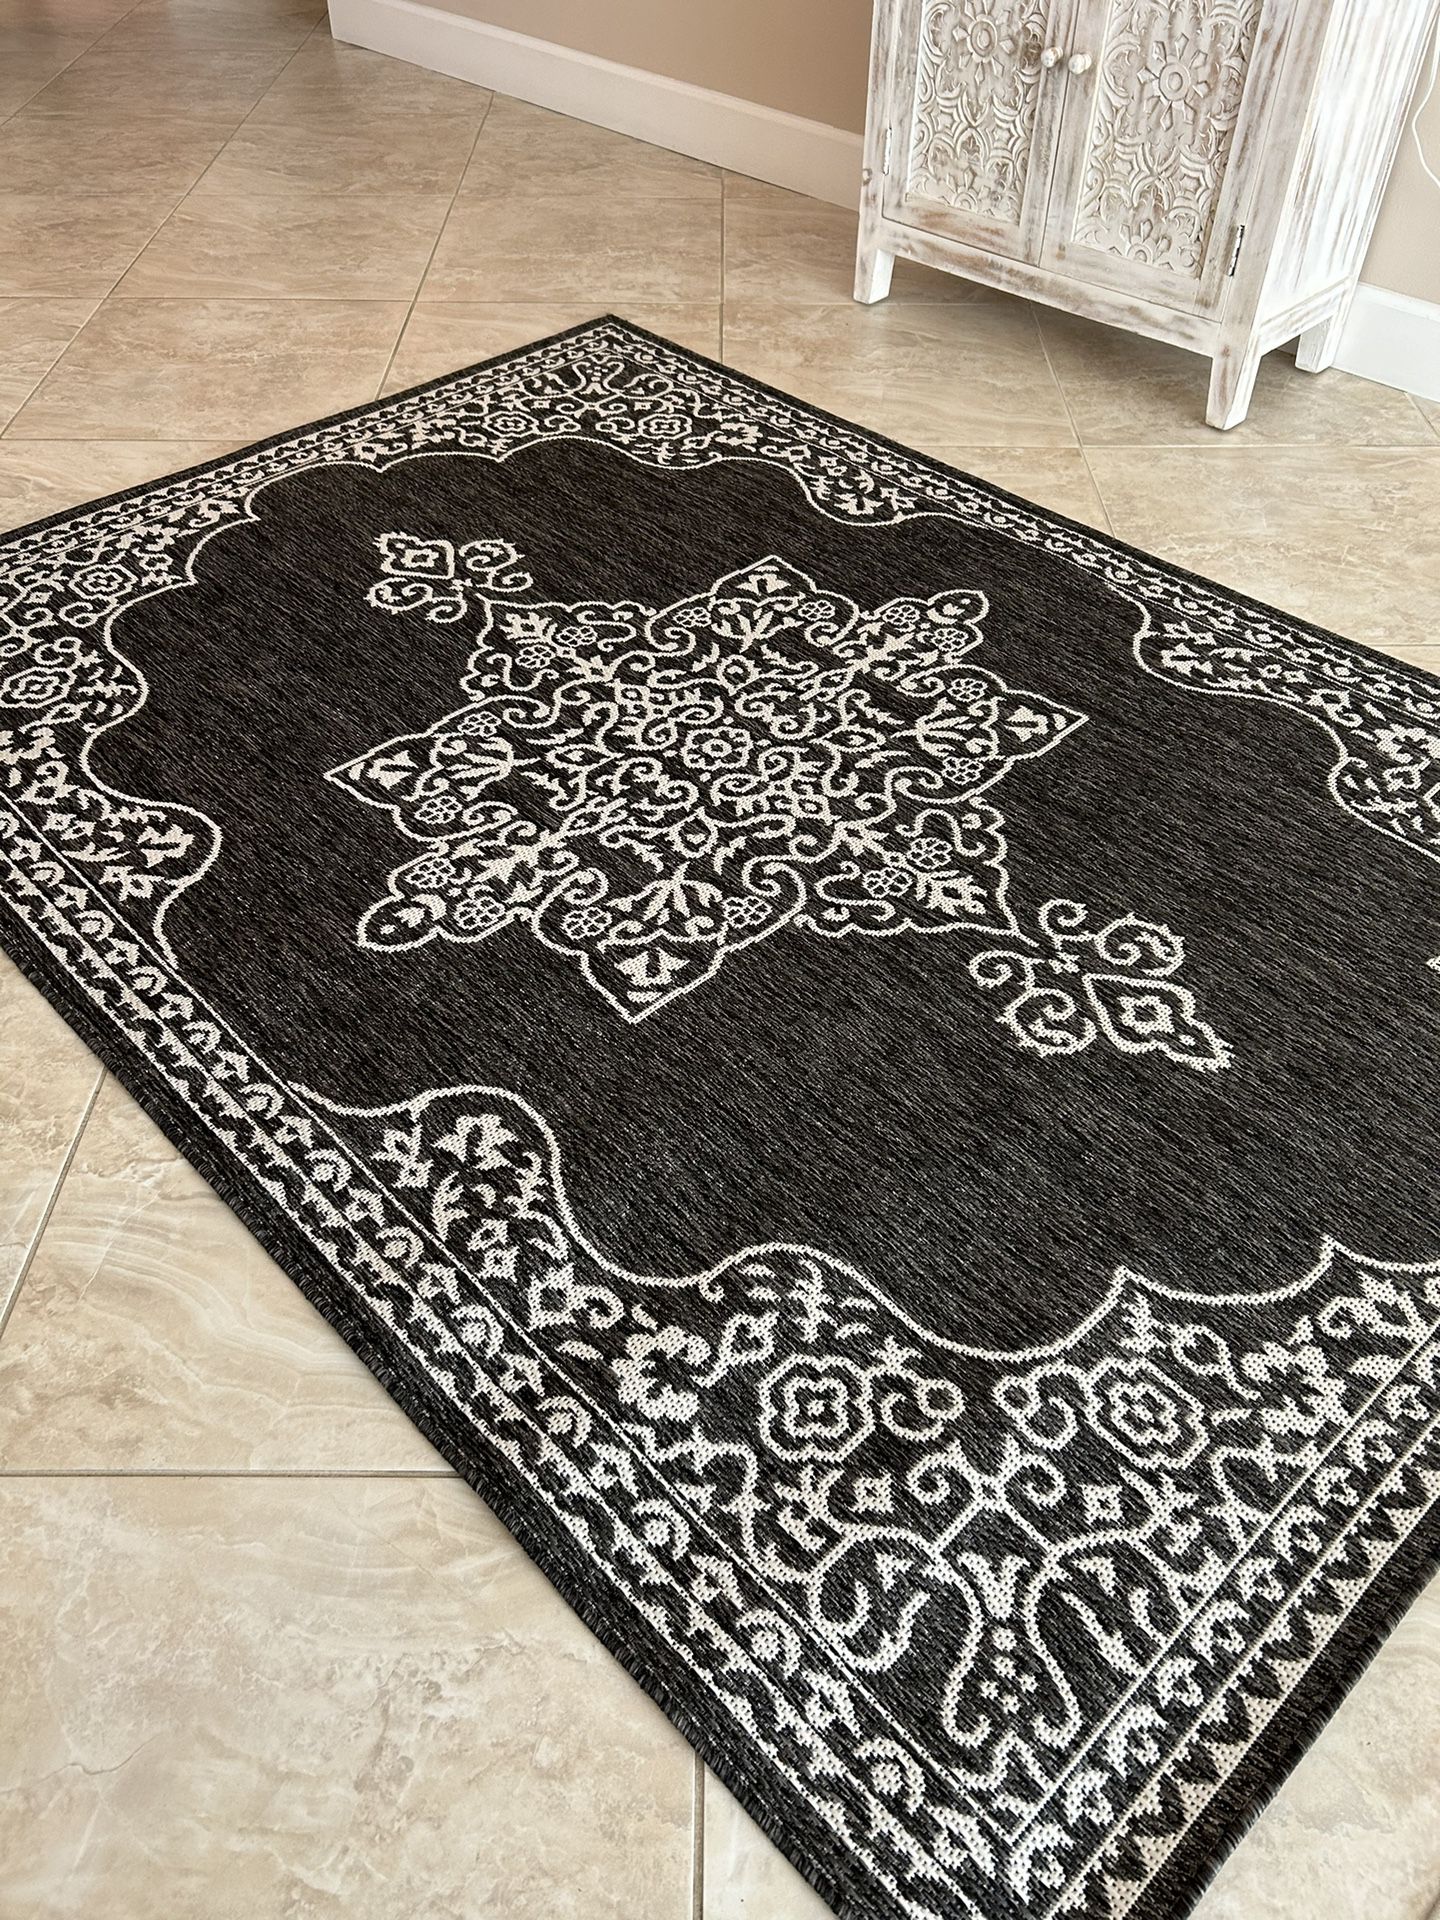 Beautiful 5x7  Black And White Outdoor and  indoor area rug 